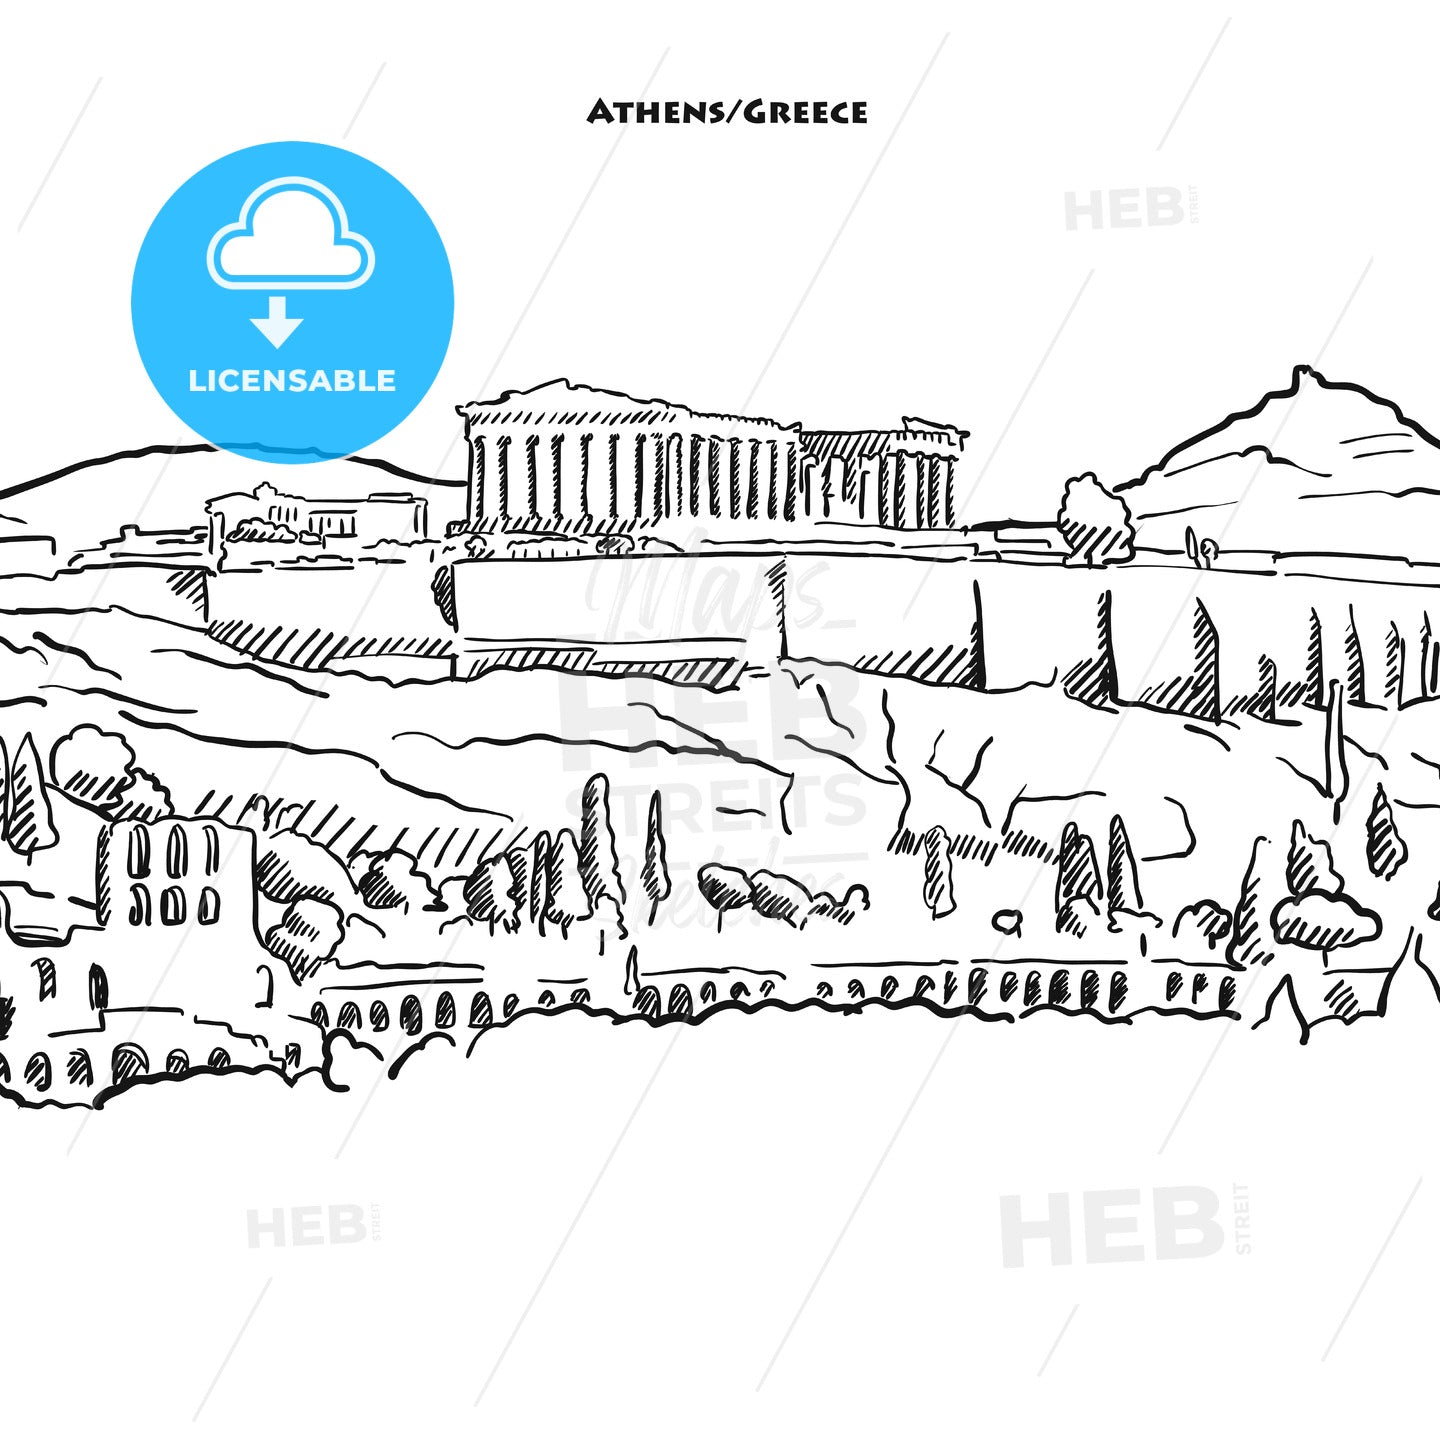 Drawing of Athens acroplolis. – instant download